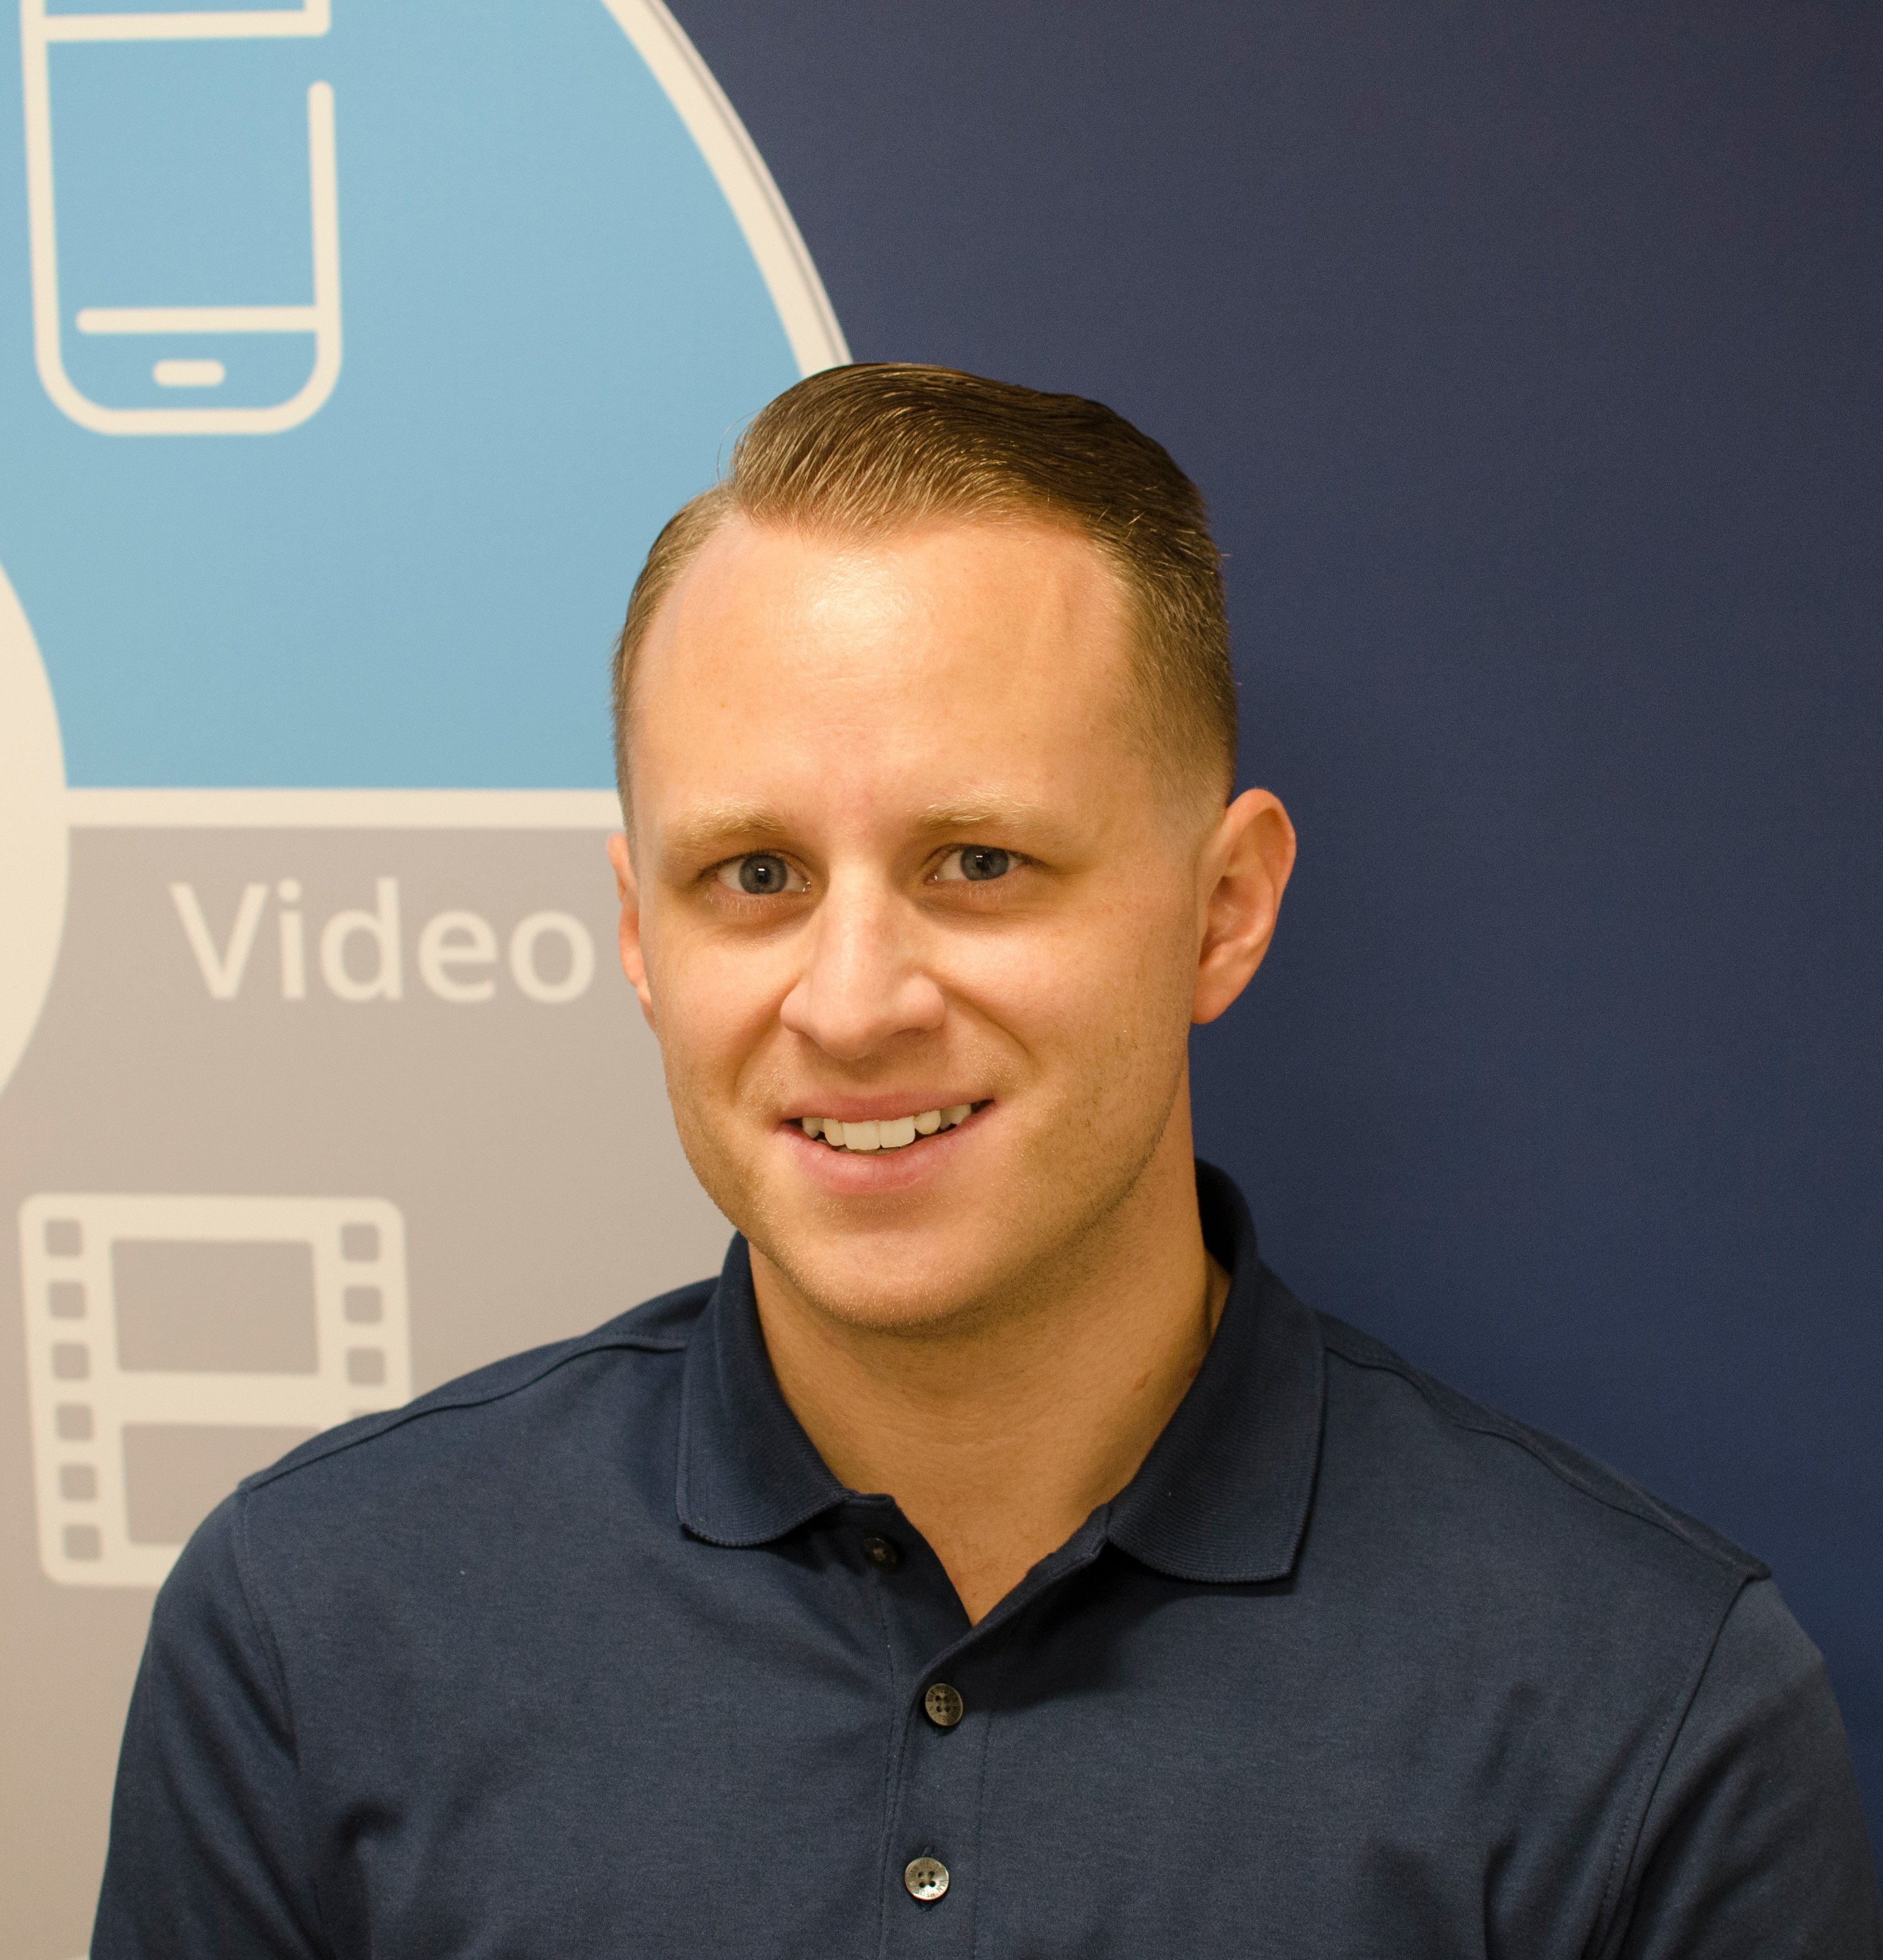 Phil Bowers, Director of Marketing